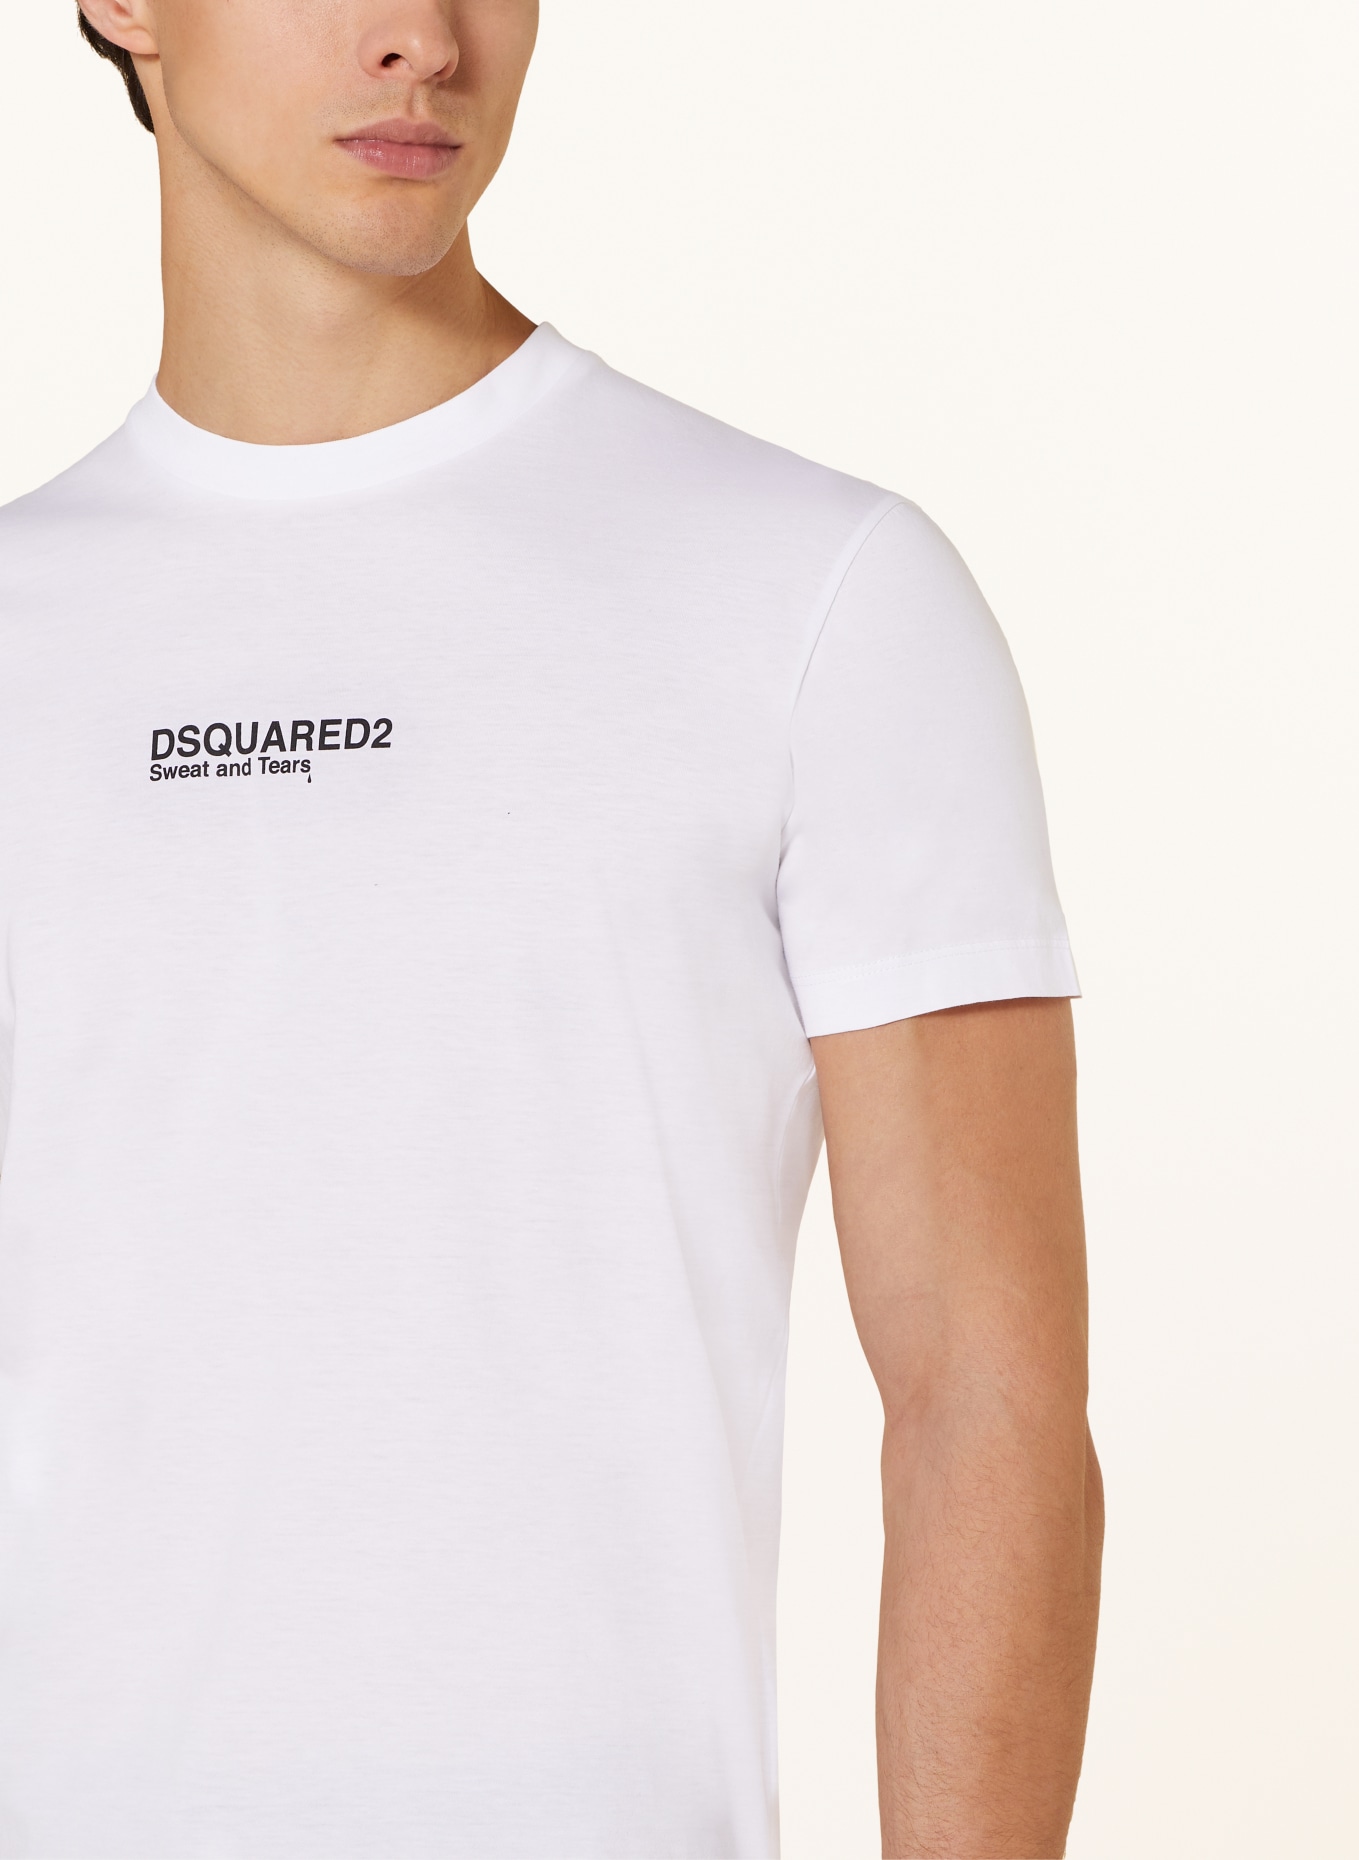 DSQUARED2 T-shirt SWEAT AND TEARS, Color: WHITE (Image 4)